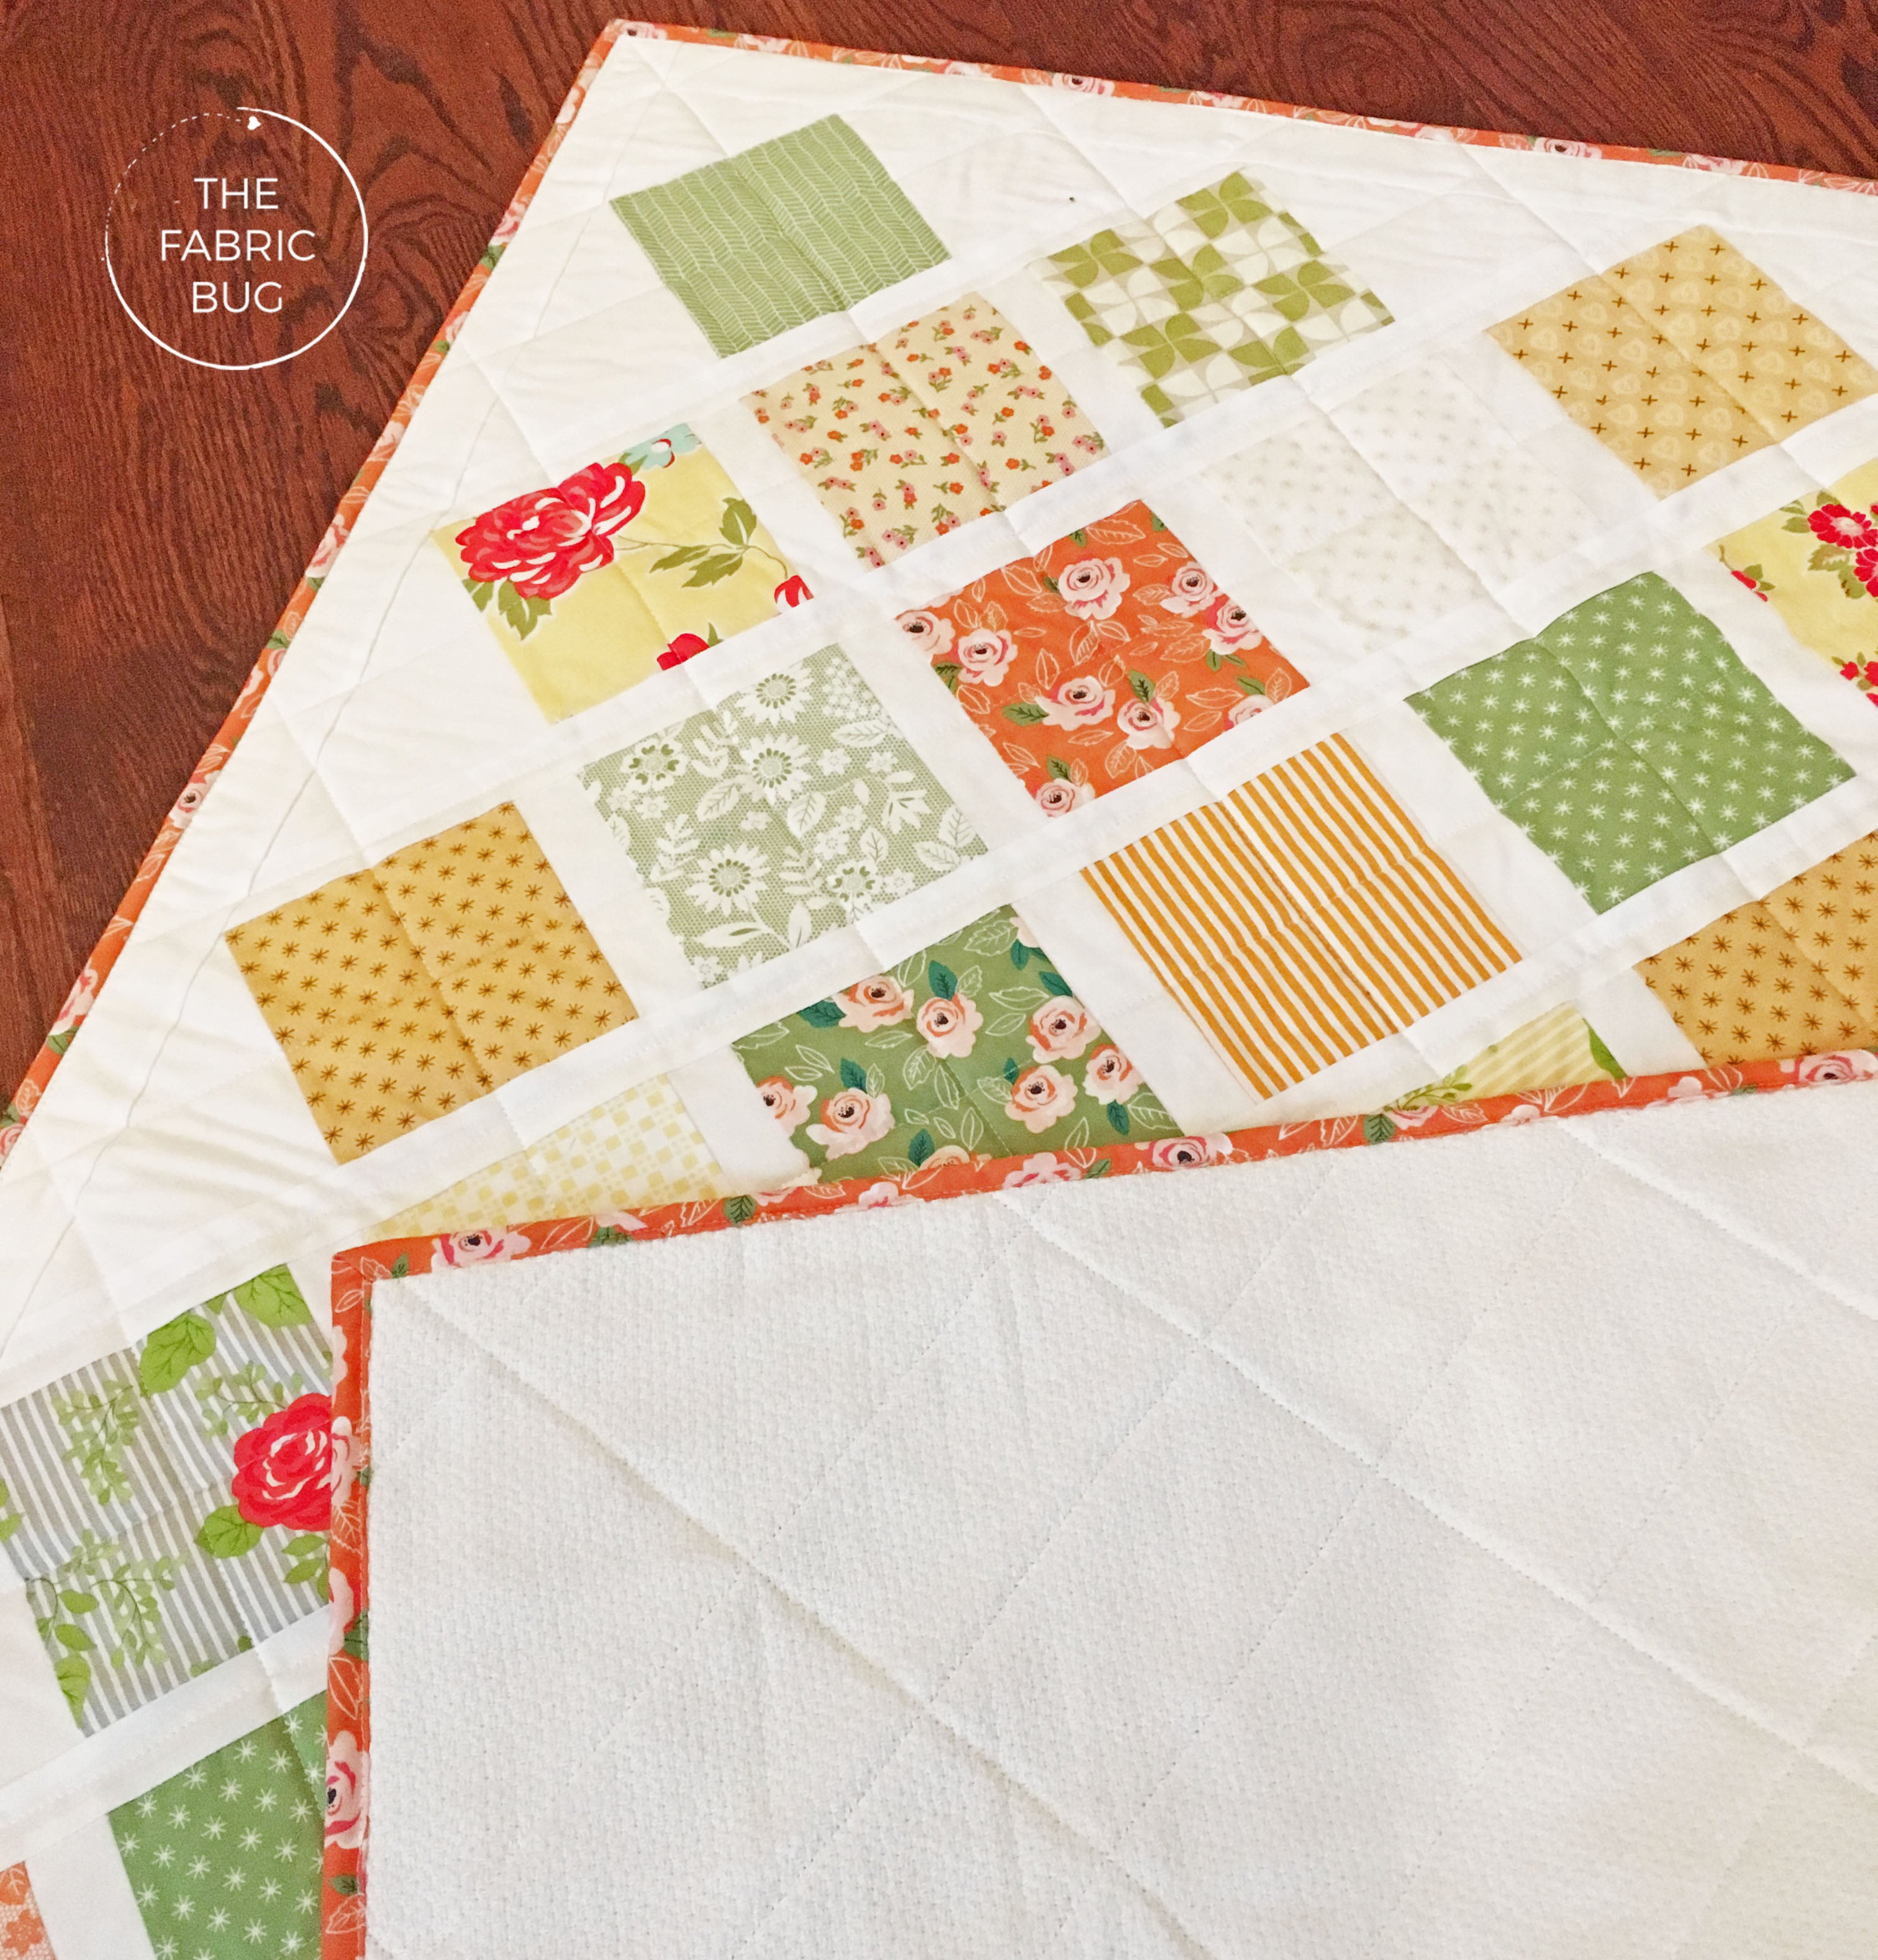 Lattice Baby Quilt - Perfect for using 5 Charm Squares - Diary of a Quilter  - a quilt blog